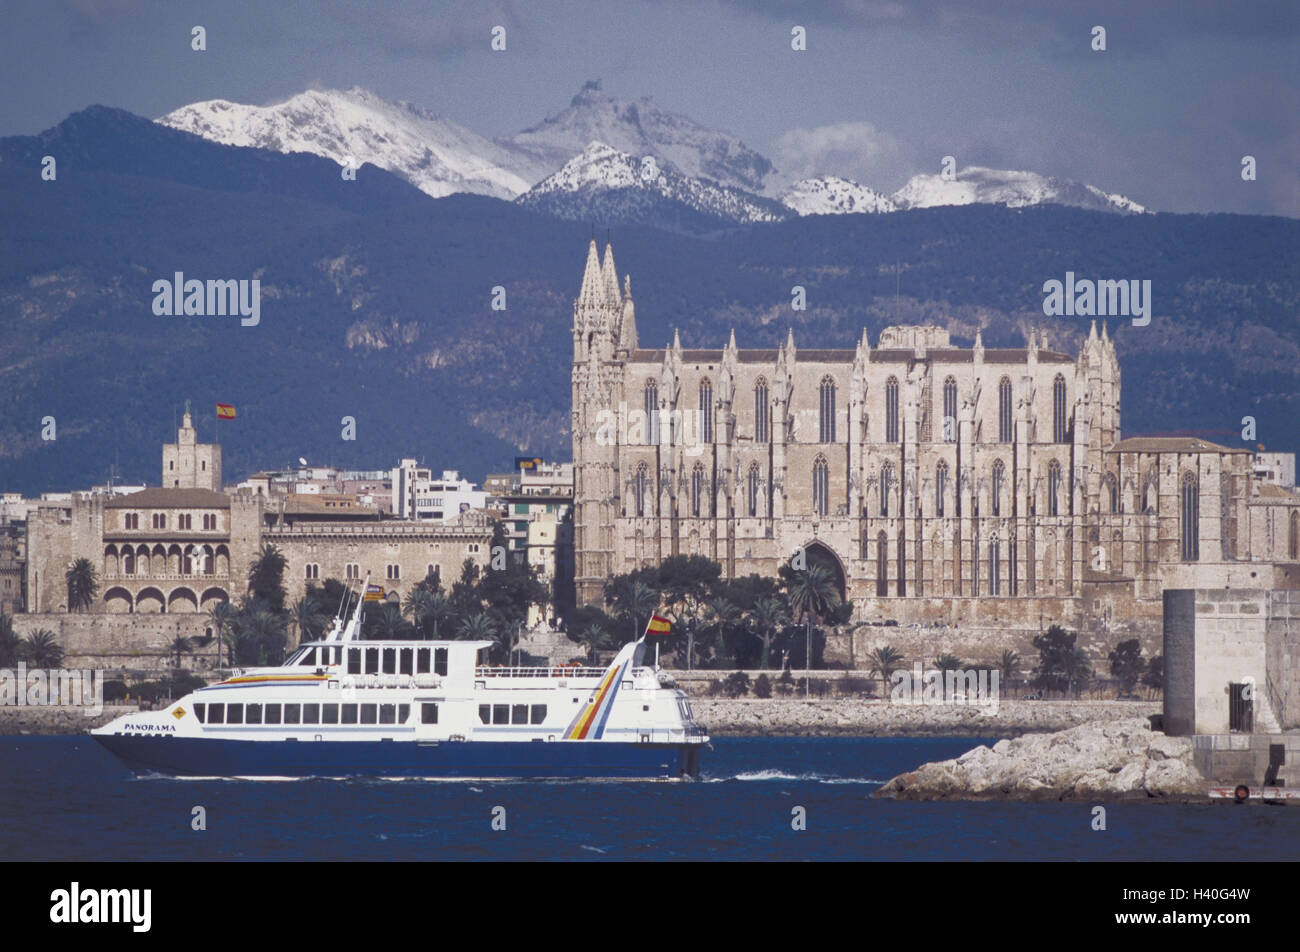 Spain, Majorca, Palma de Majorca, town view, cathedral, sea, excursion boat the Mediterranean Sea, the Balearic Islands, island, capital, town, church, church, start construction work in 1300, architecture, culture, place of interest, ship, boat, boat tri Stock Photo